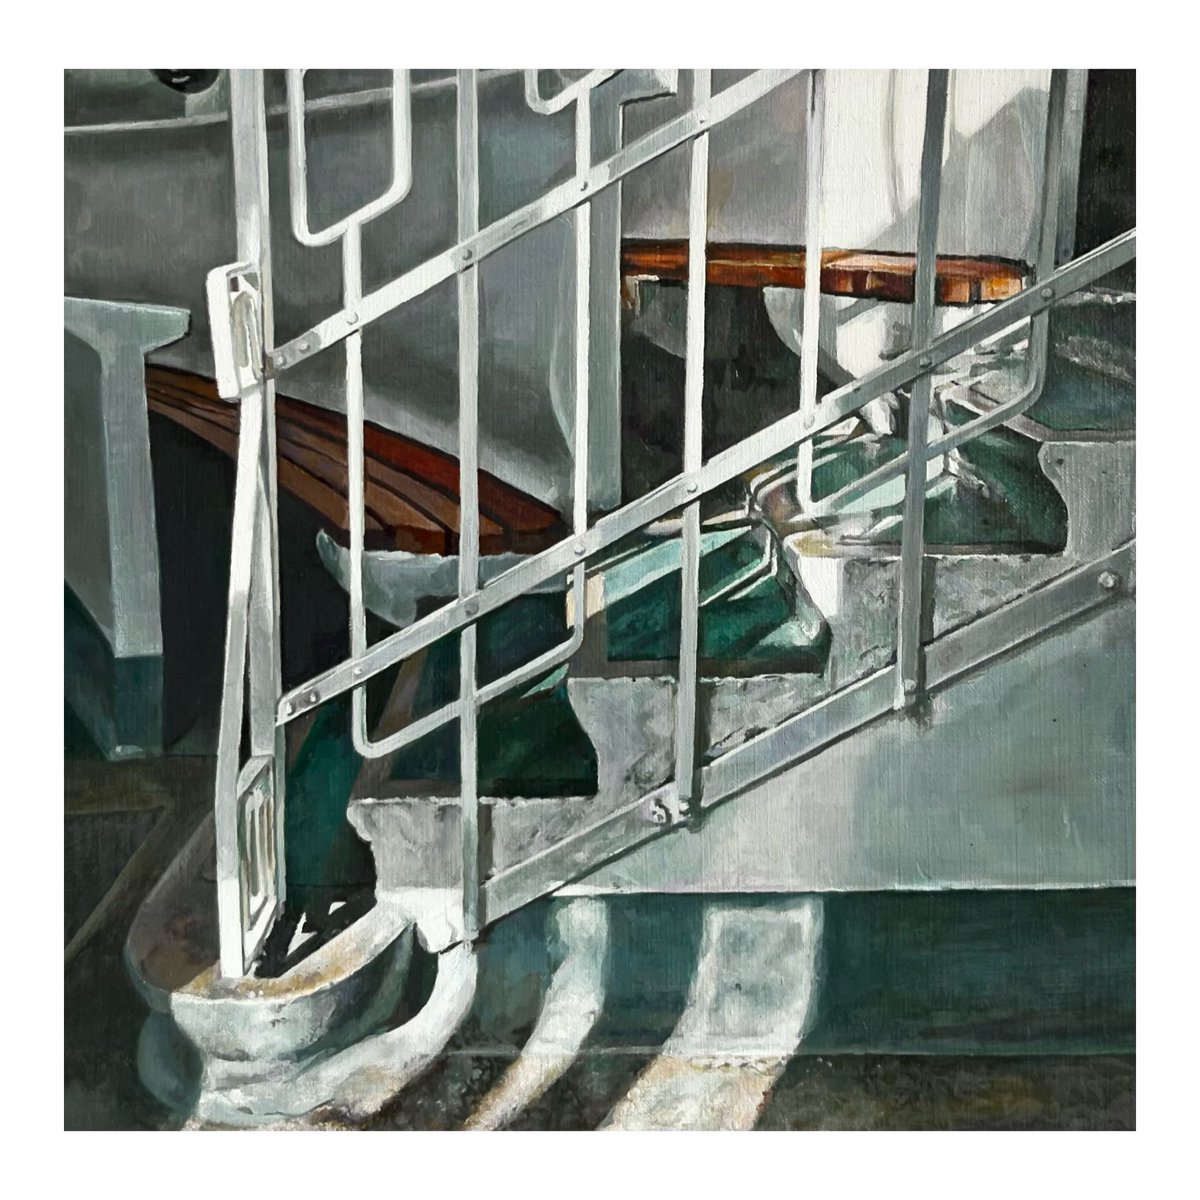 The following is a work in progress and this is also a working title; 

First Lecture (University of Vienna)
Oil on canvas paper 
20 x 20 cms
#wip #sunlight #stairdesign #staircase #painting #oilpainting #contemporarypainting